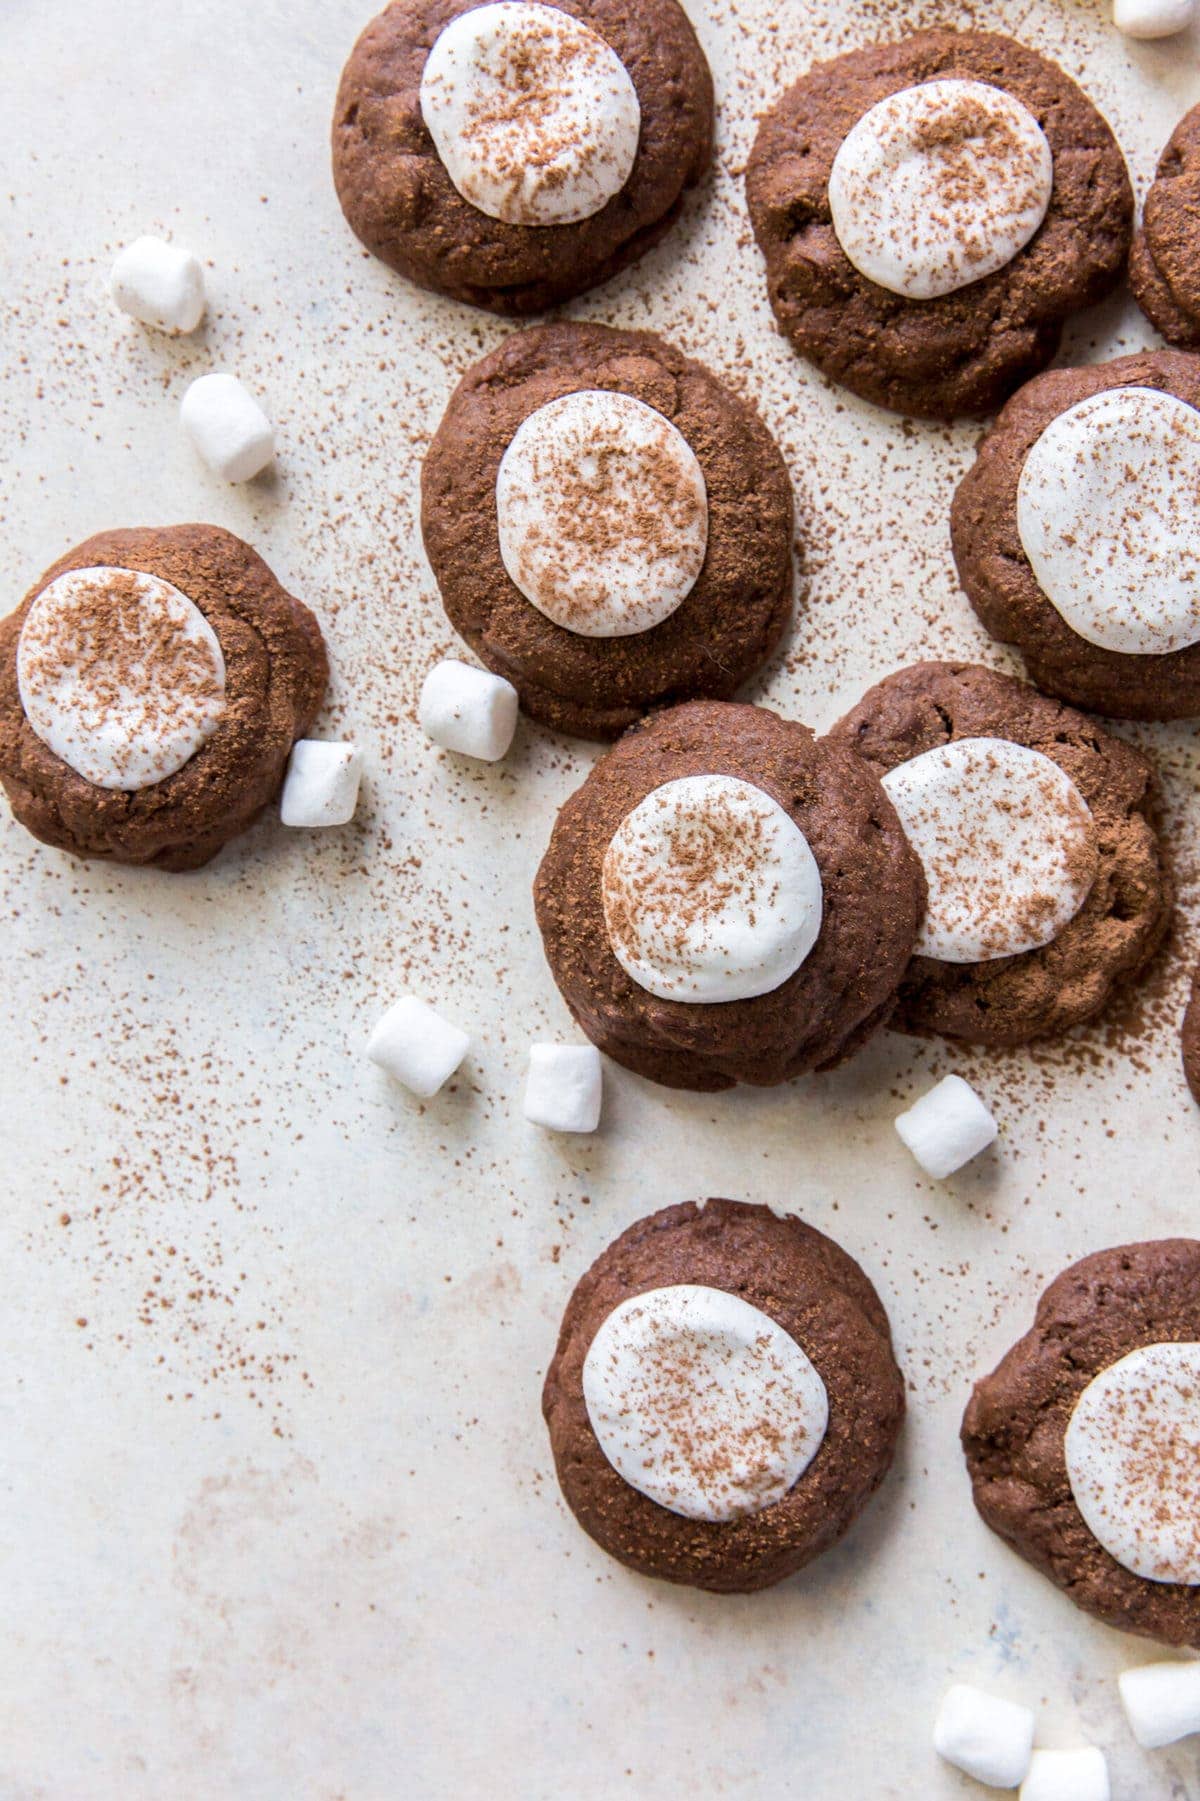 hot cocoa cookies topped with marshmallows halves and dusted with cocoa